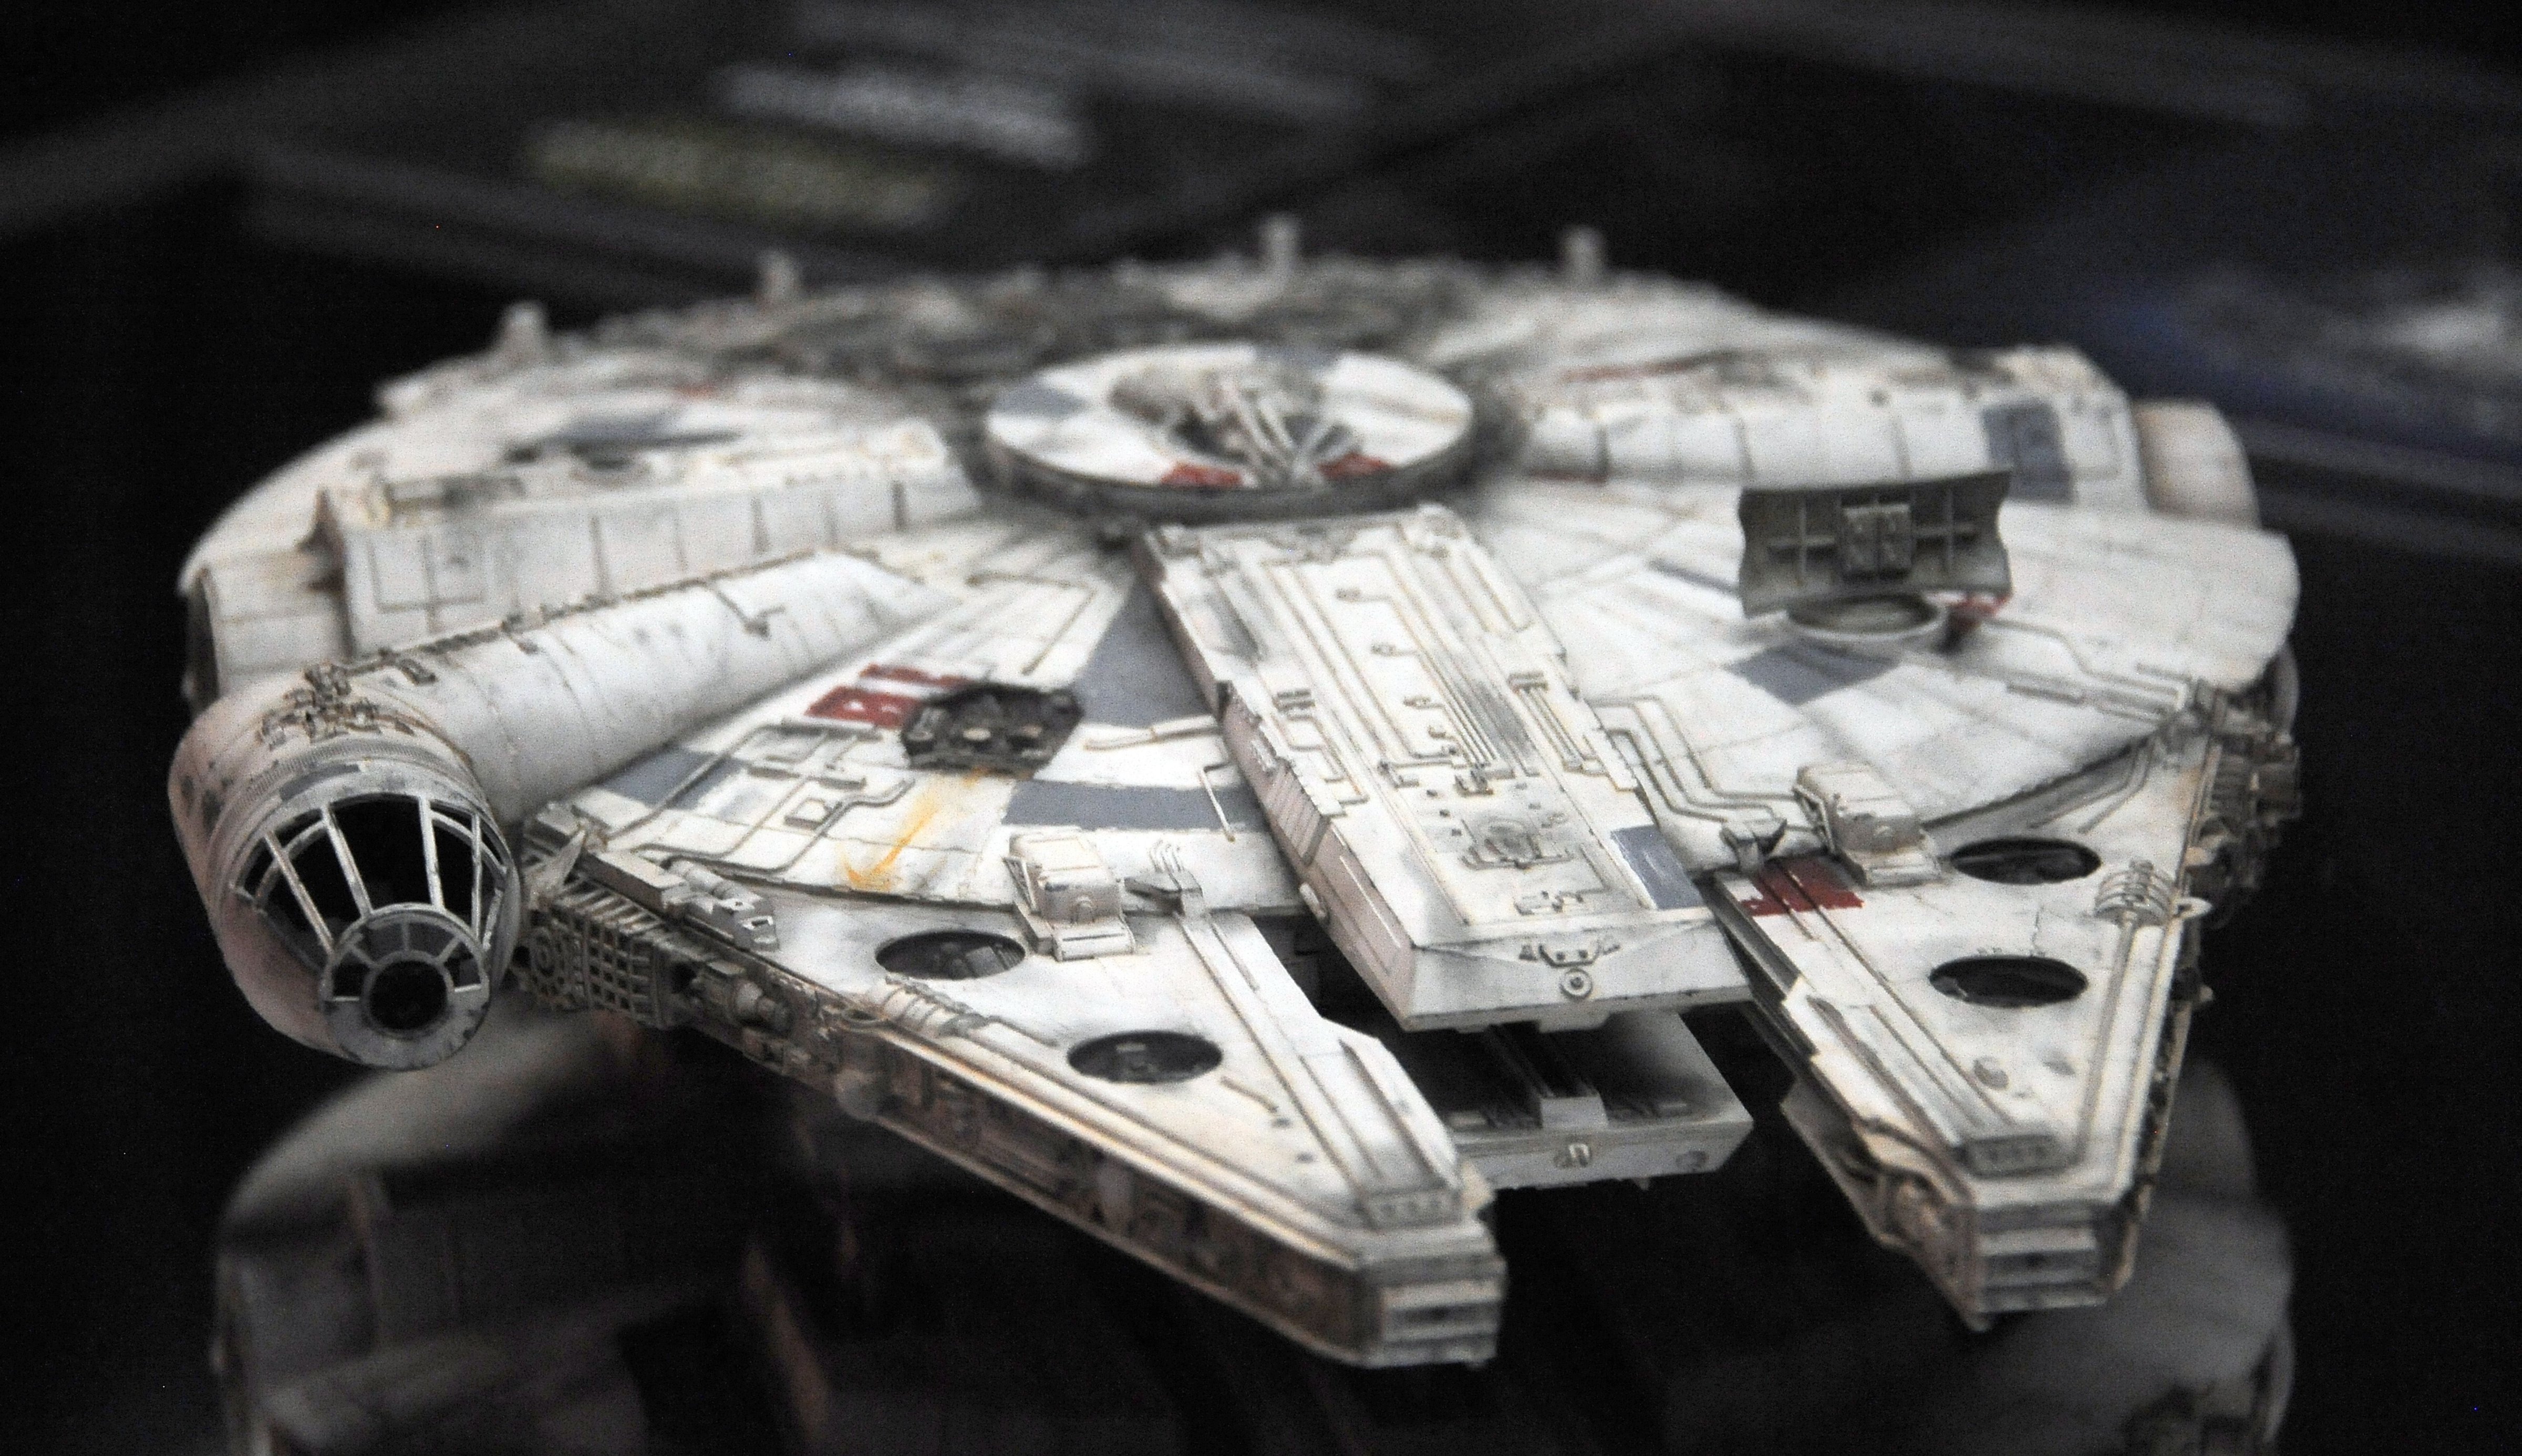 The new Millennium Falcon on display inside the ‘Star Wars The Force Awakens Exhibit’ at Day One of Disney's 2015 Star Wars Celebration held at the Anaheim Convention Center on April 16, 2015. (Albert L. Ortega—2015 Albert L. Ortega)